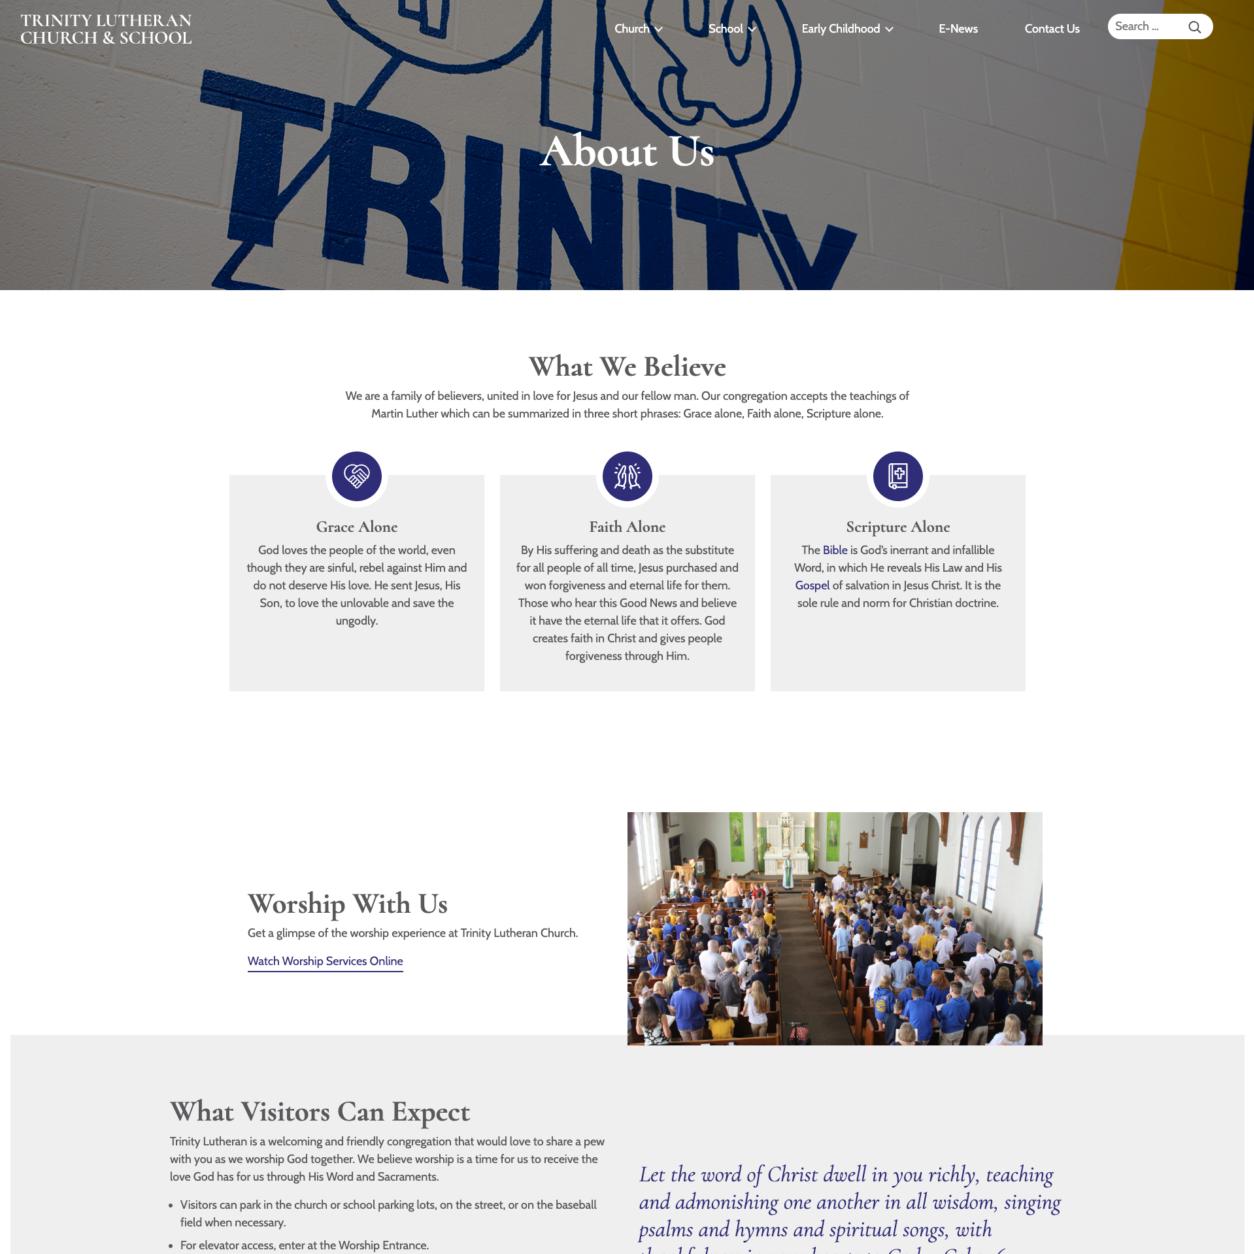 trinity lutheran church and school about us page